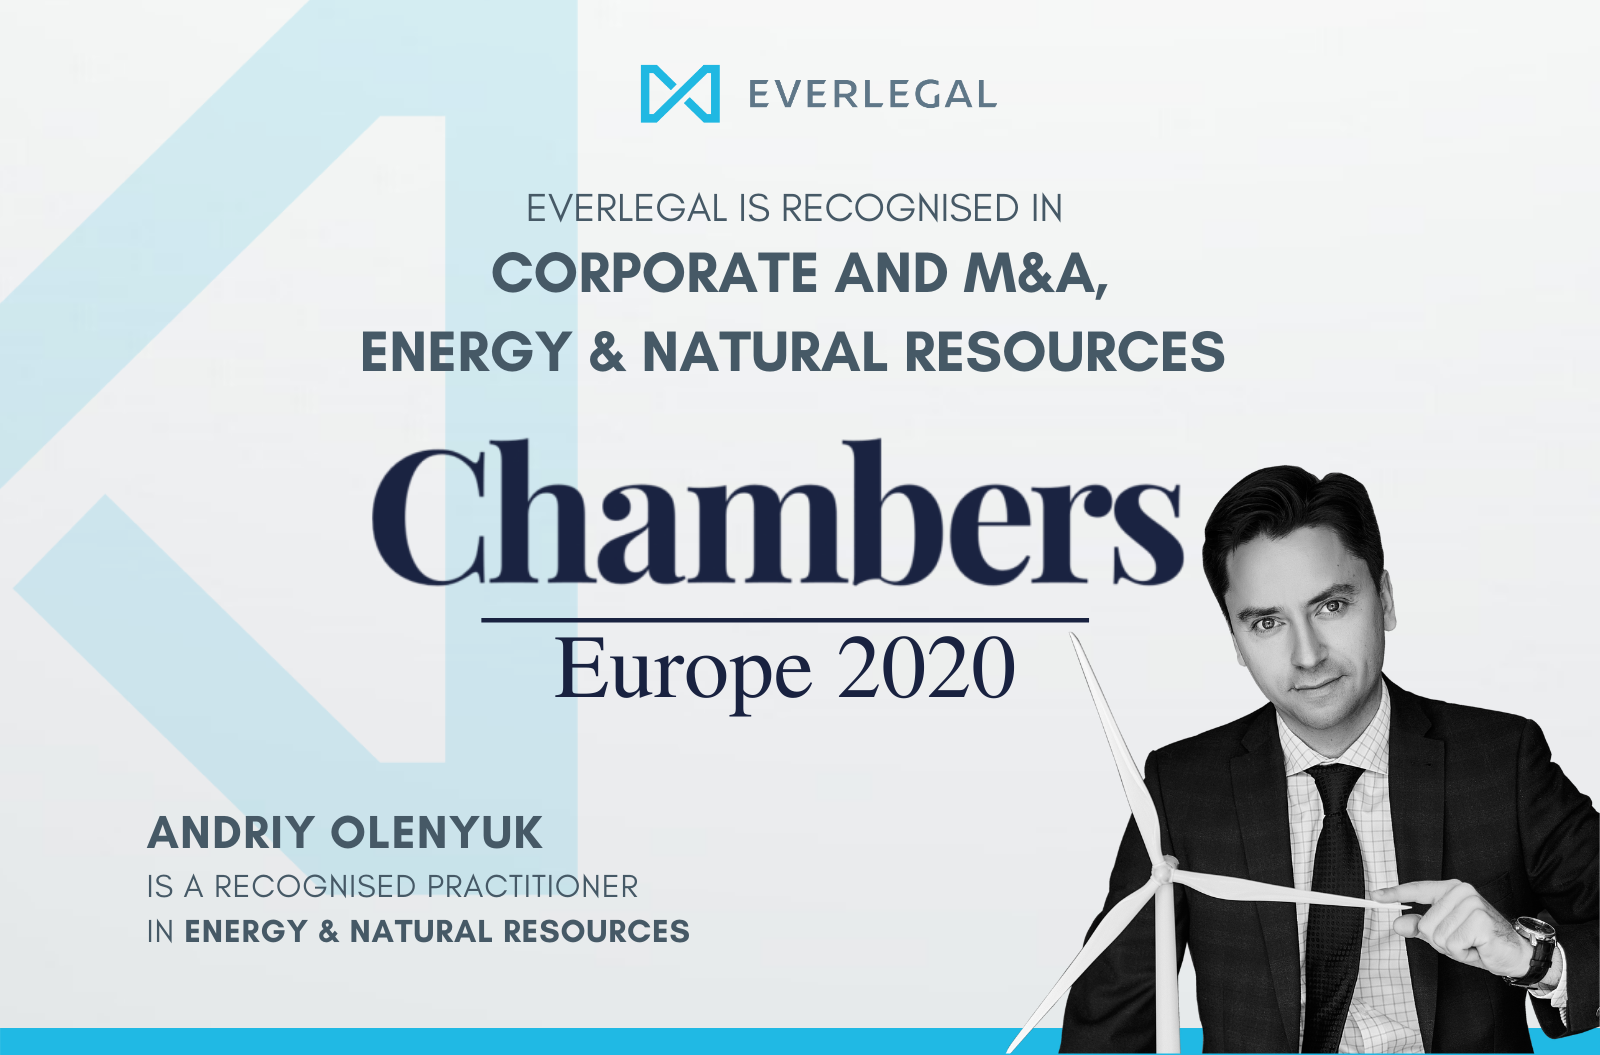 EVERLEGAL is recognised by Chambers Europe 2020